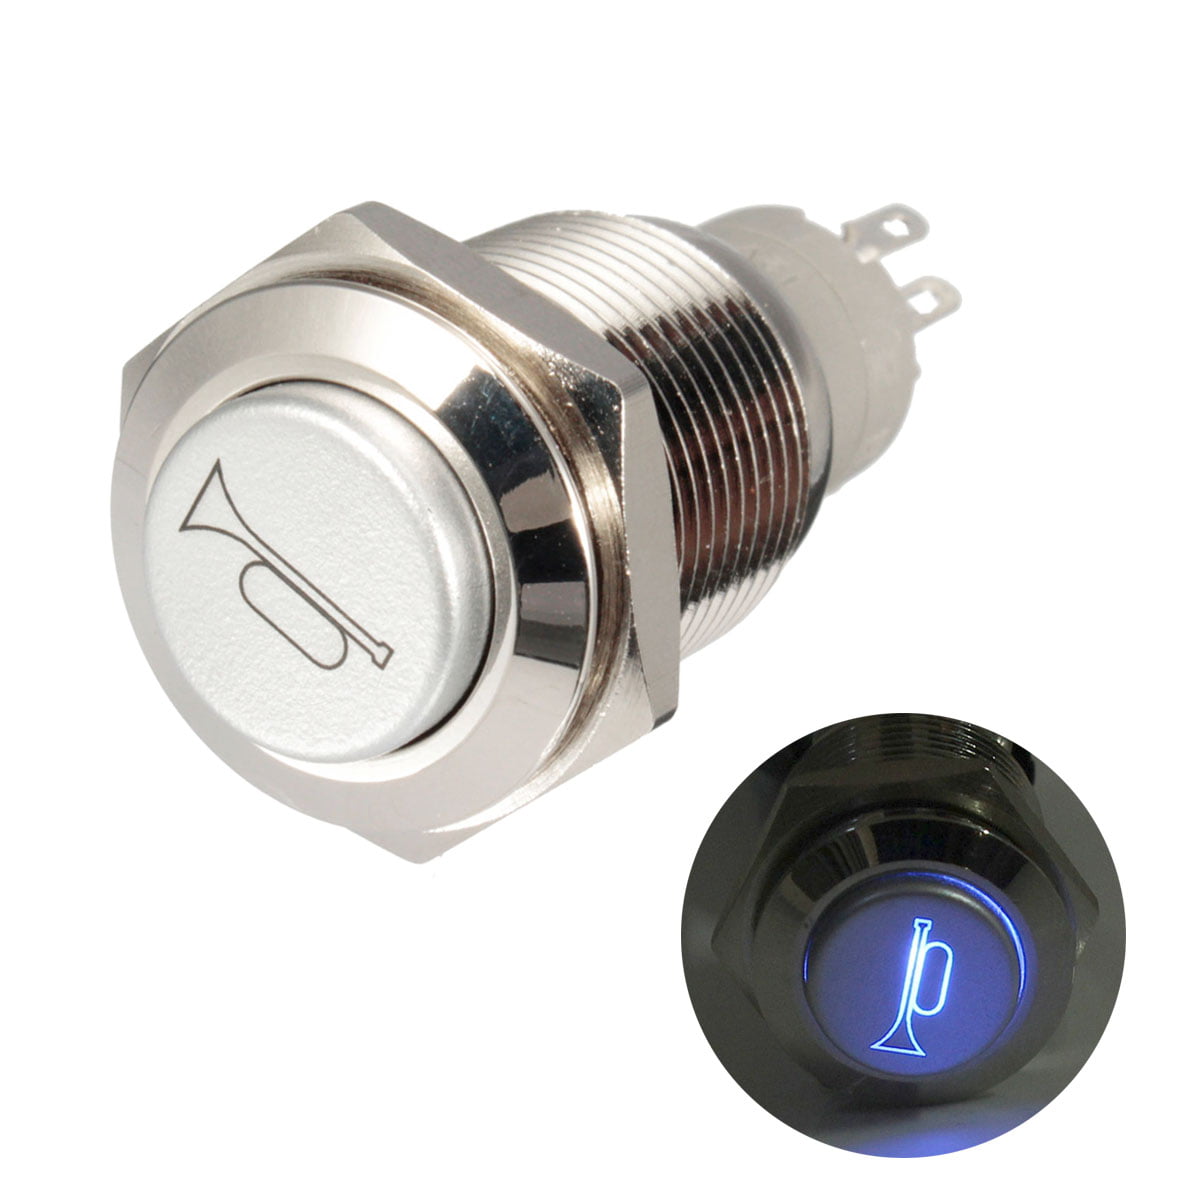 16mm Momentary Metal Switch Car Boat LED Waterproof New 12V Horn Push Button